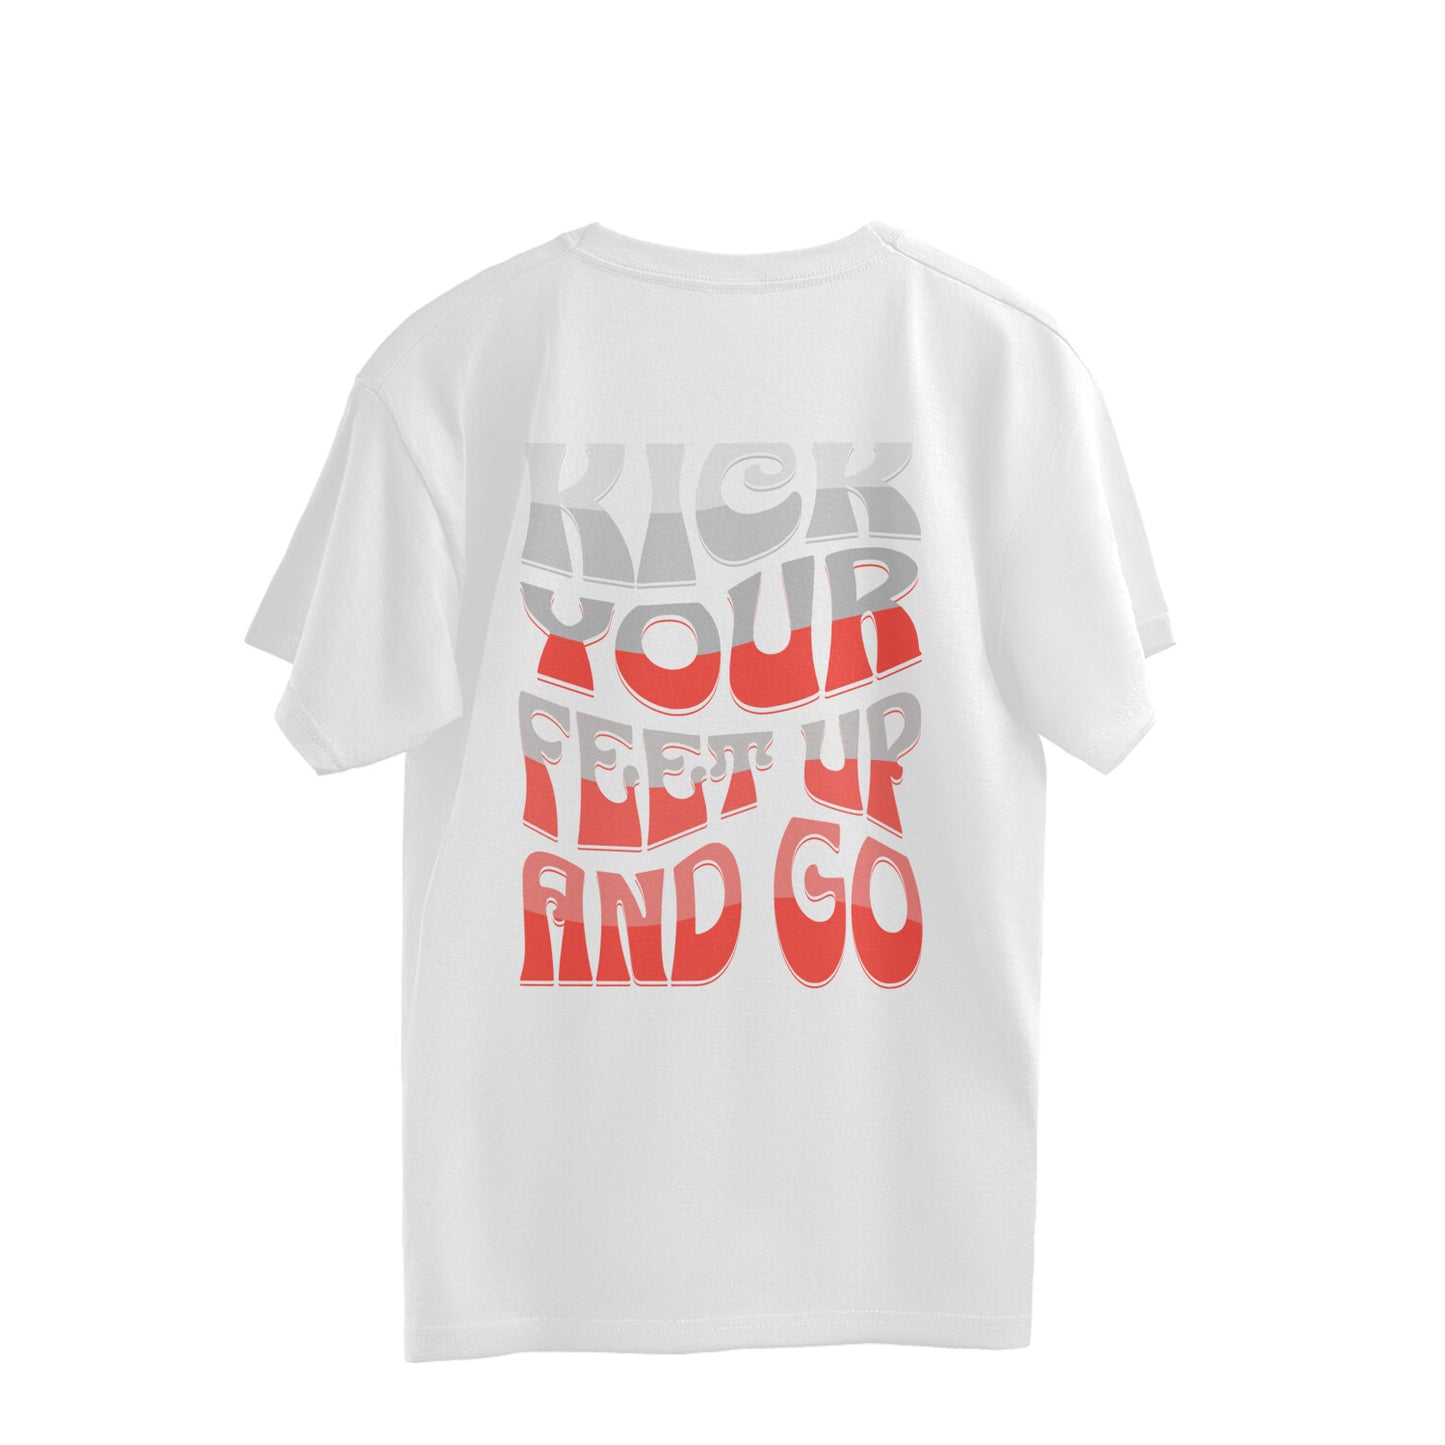 Kick Your Feet Up And Go Overhalf T-shirt